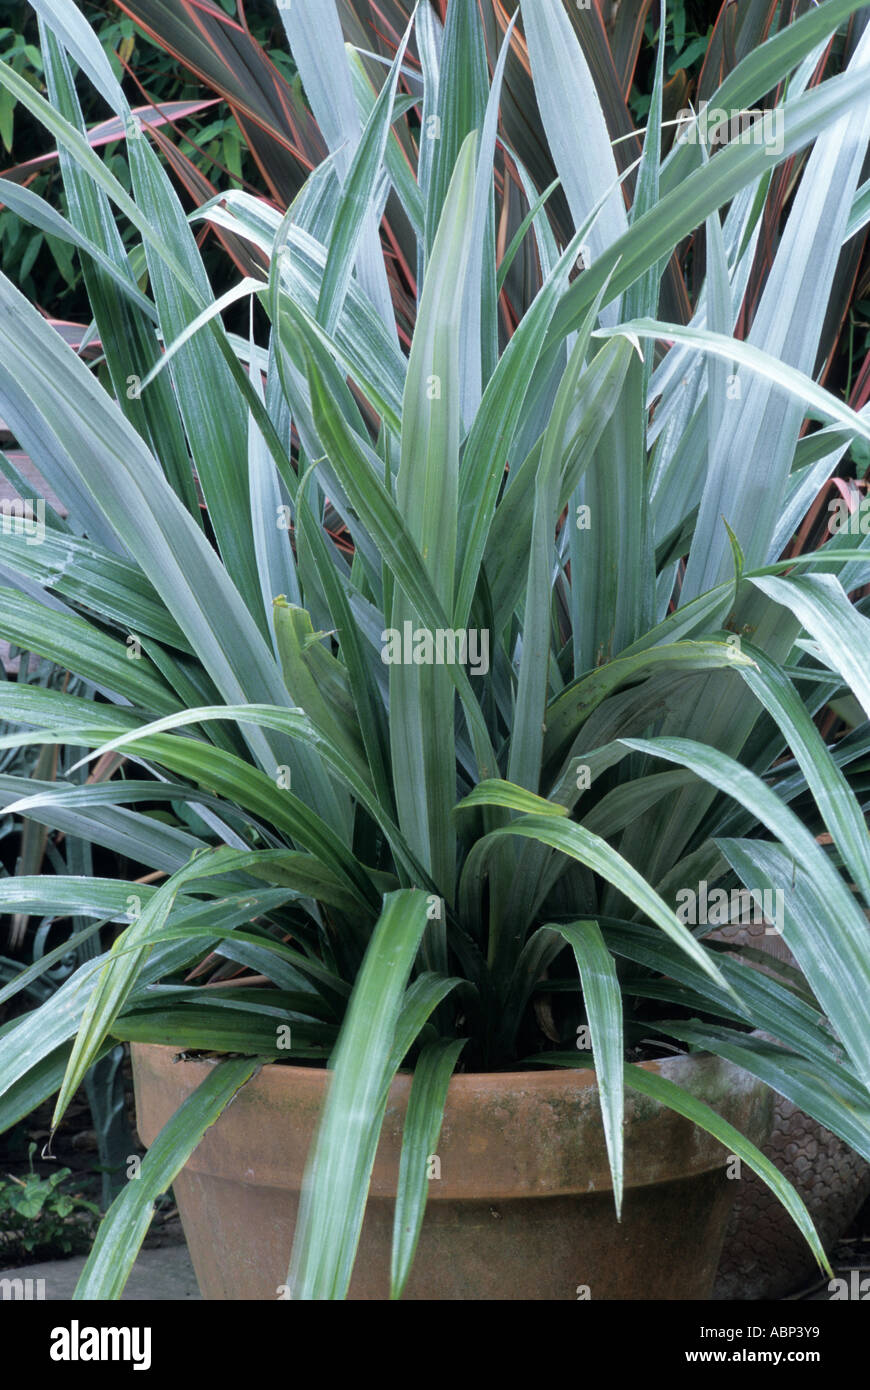 Astelia chathamica ,container, silver foliage plant plants garden containers pot pots astelias containers Stock Photo